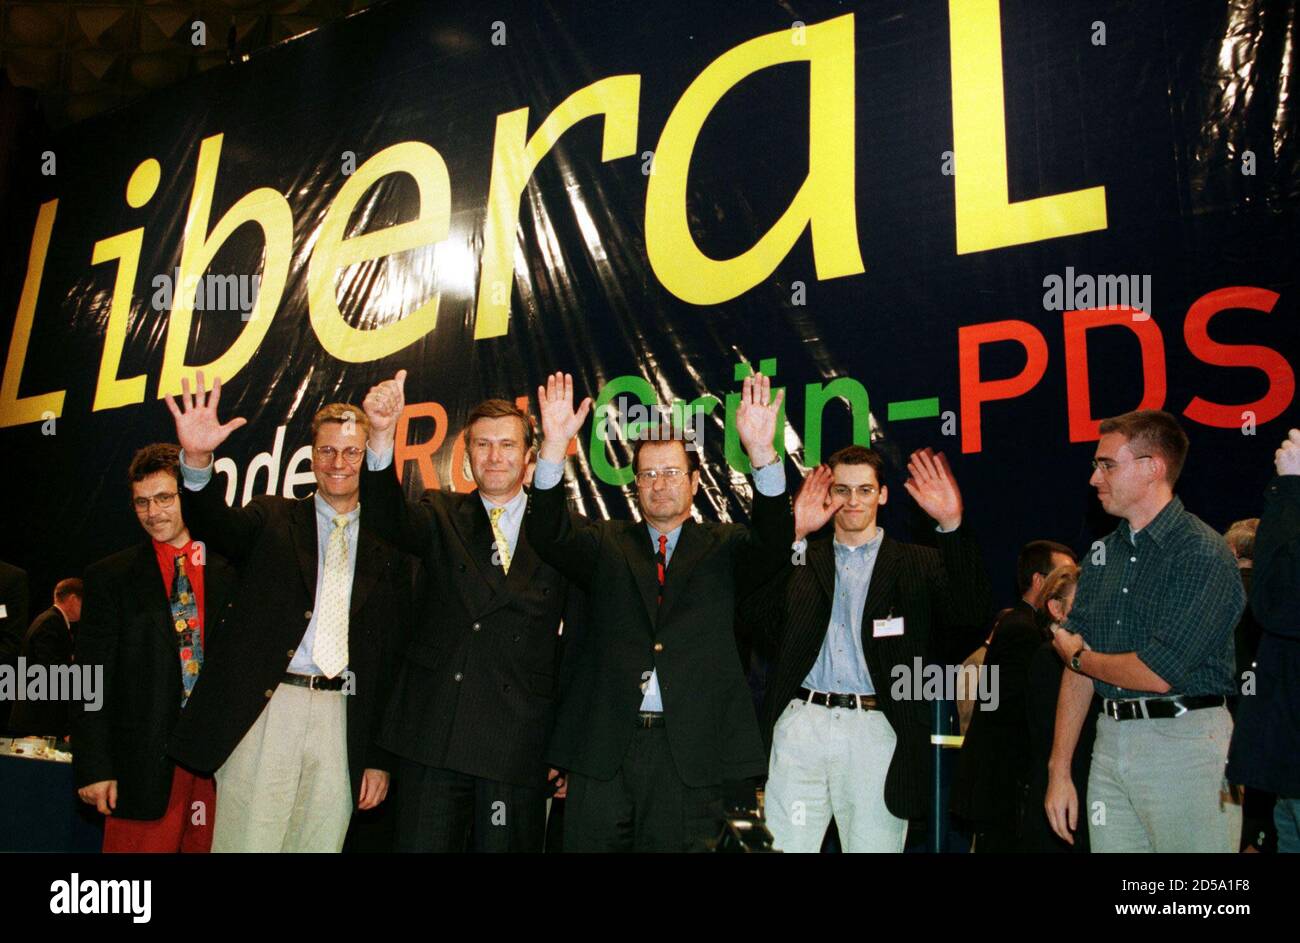 FDP party manager Guido Westerwelle, Free Democratic party (FDP) Wolfgang Gerhardt and German Foreign Minister Klaus Kinkel (LtR) wave to delegates accompanied by party members in front of an election poster reading ' Liberal or Red-Green-PDS (Party of Democratic Socialism) '  at a one-day party congress in Bonn, August, 29. The FDP is launching a massive drive for 'second votes' in the final stages of their election campaign to reach the five percent threshold in Germany's general elections on September 27. Stock Photo